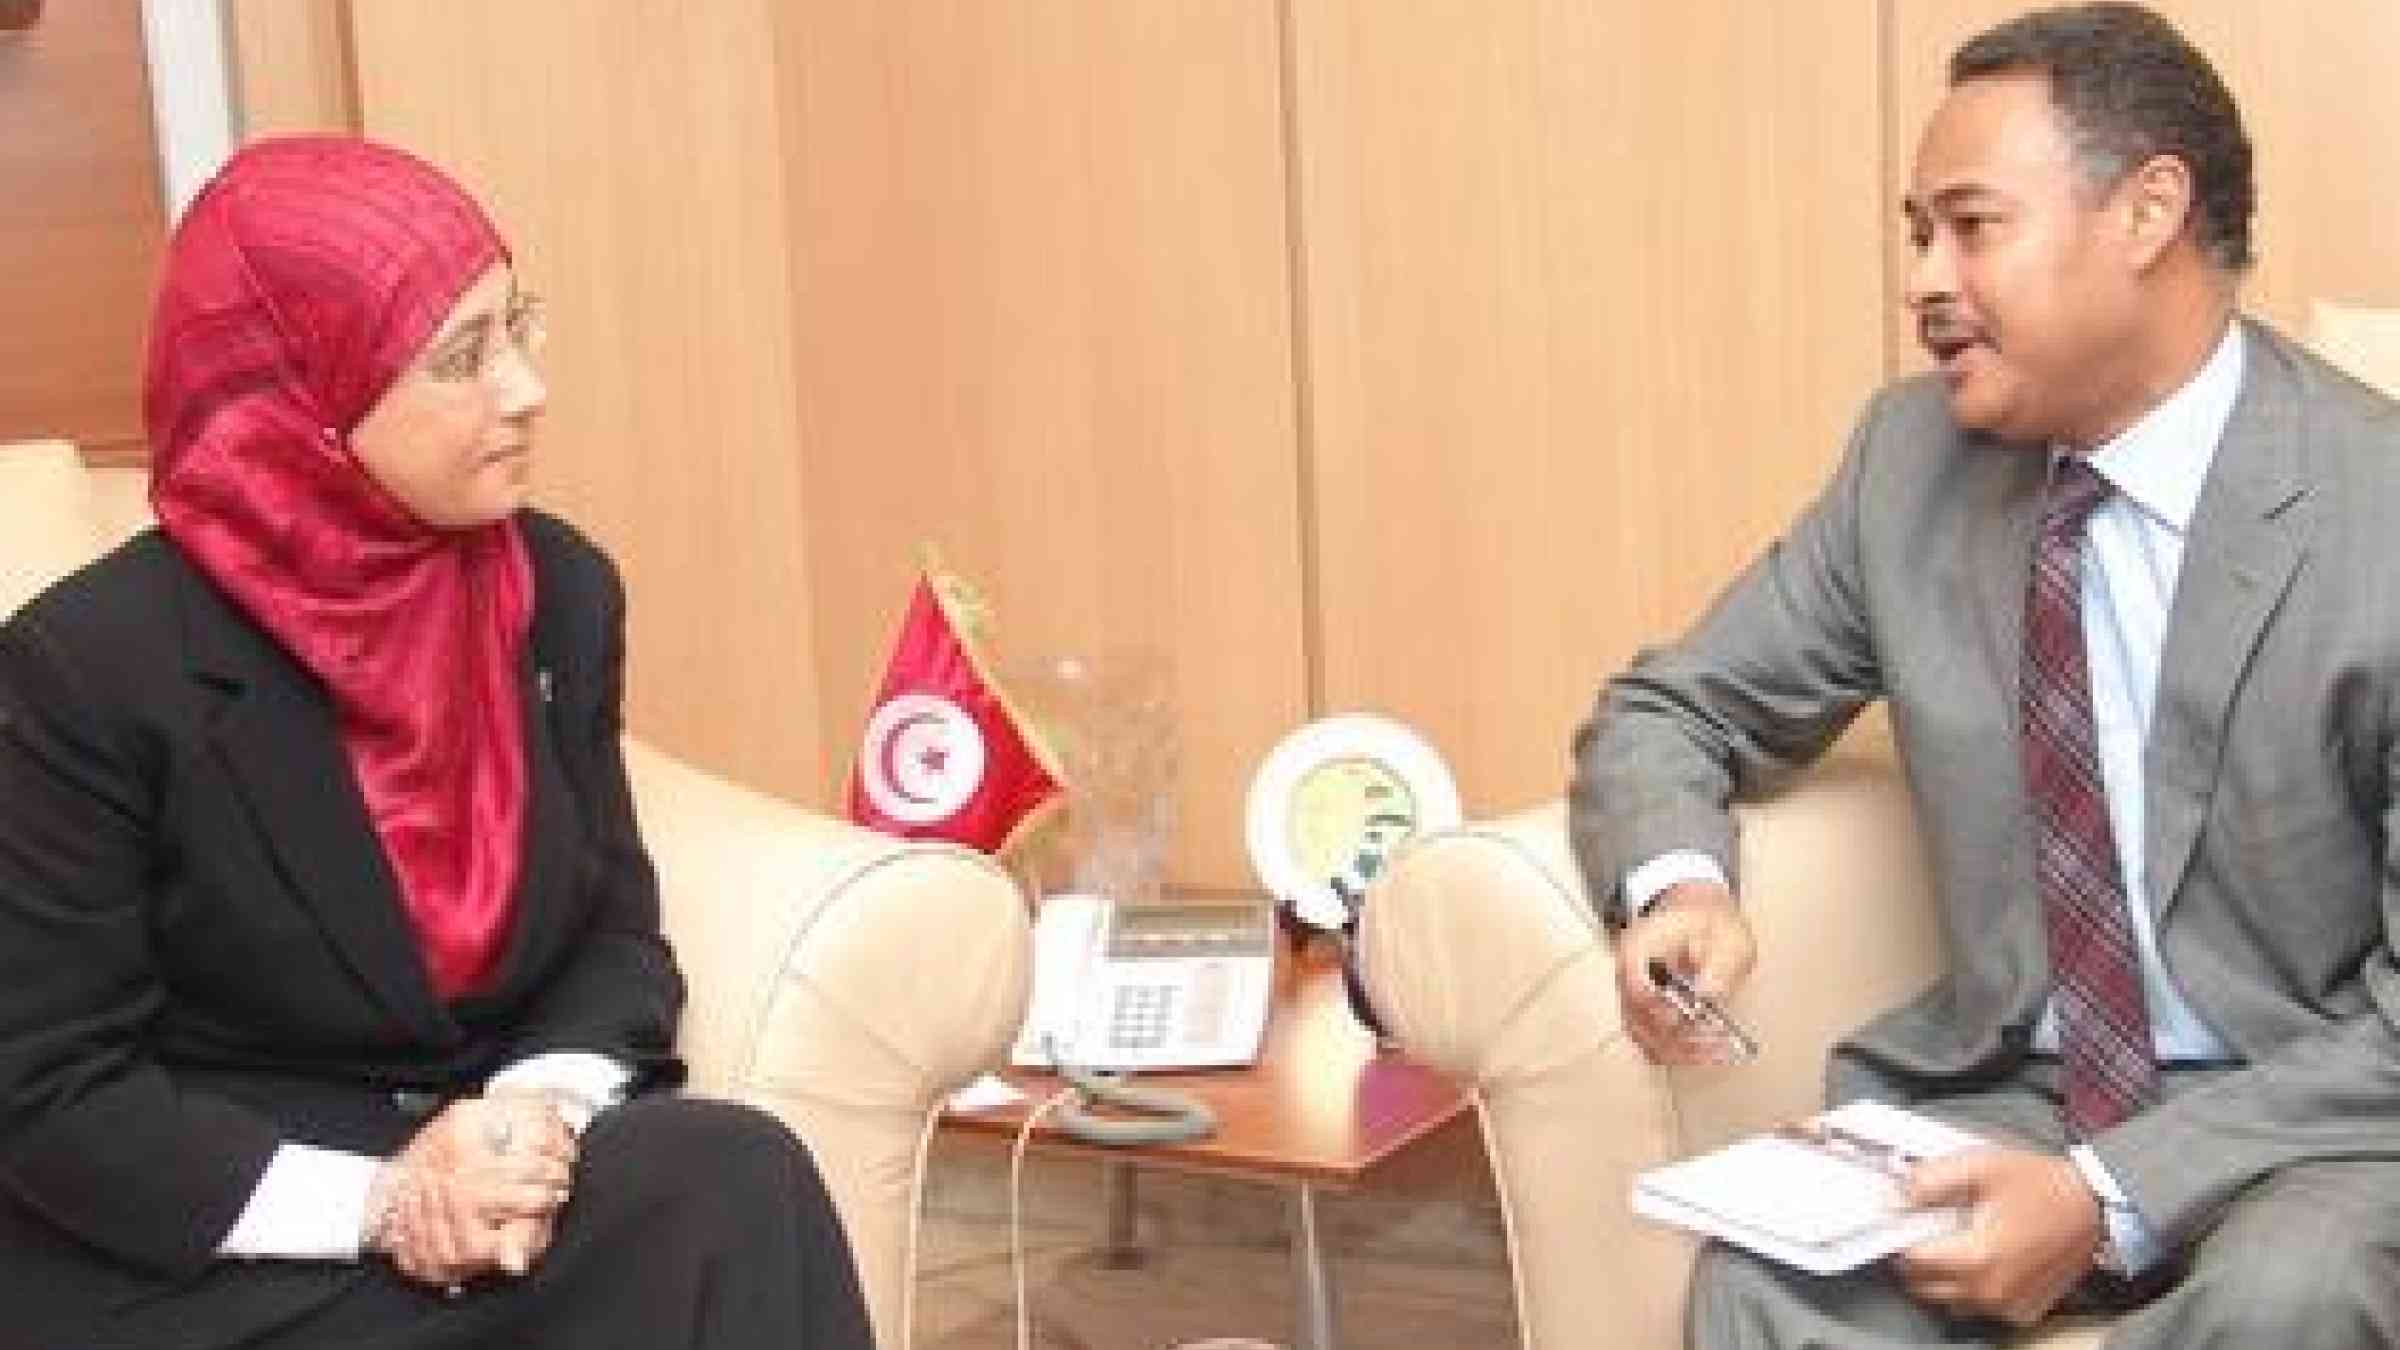 From left: Tunisia's Minister of Environment, Mamia Benna Zayani, and Amjad Abbashar, Head of UNISDR's Arab States regional office.